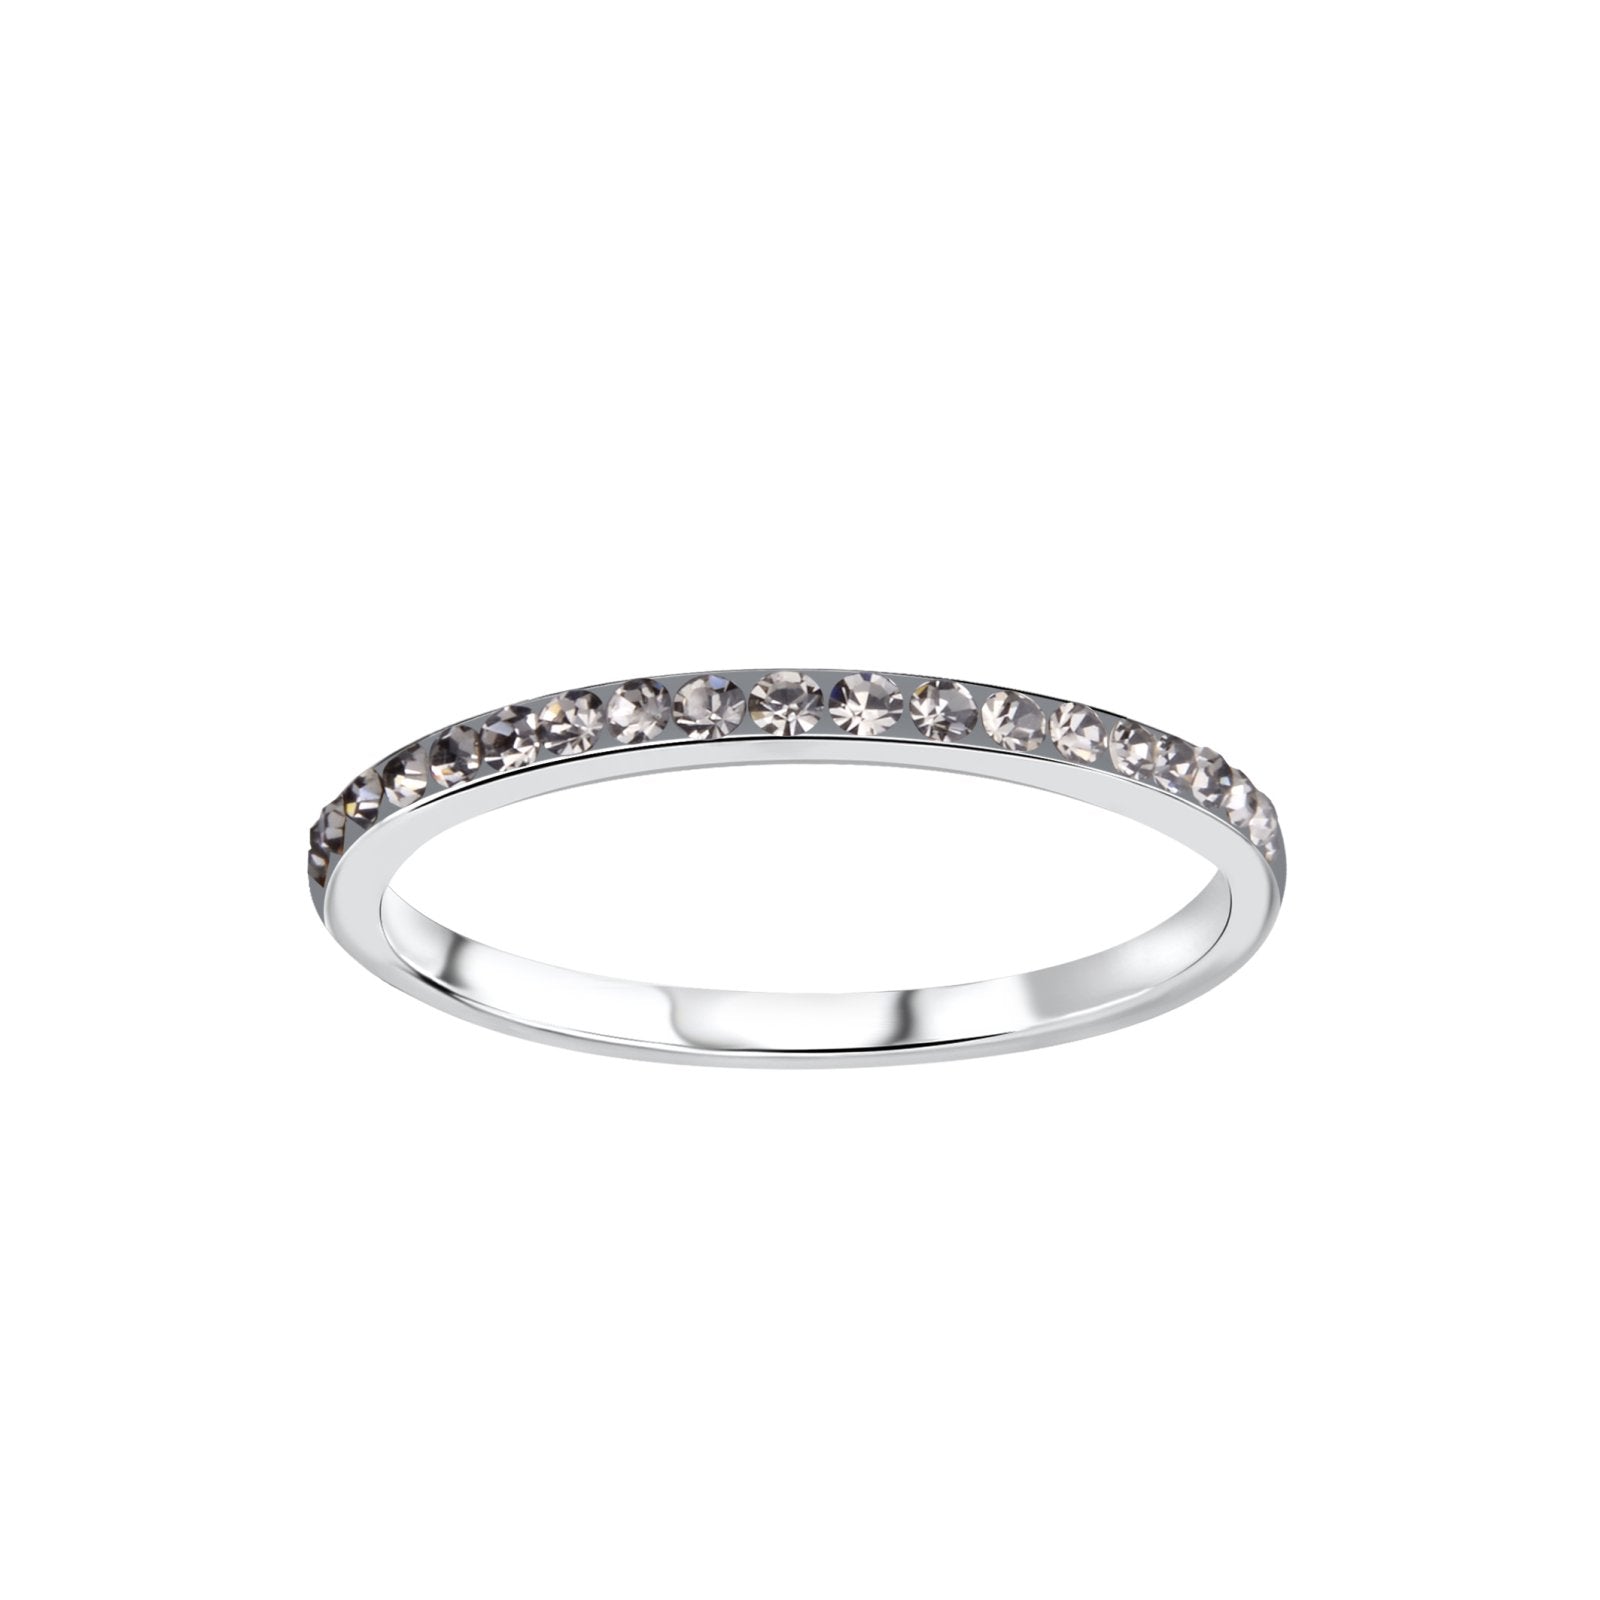 Eternity Silver Ring setting with white and Gray Crystal